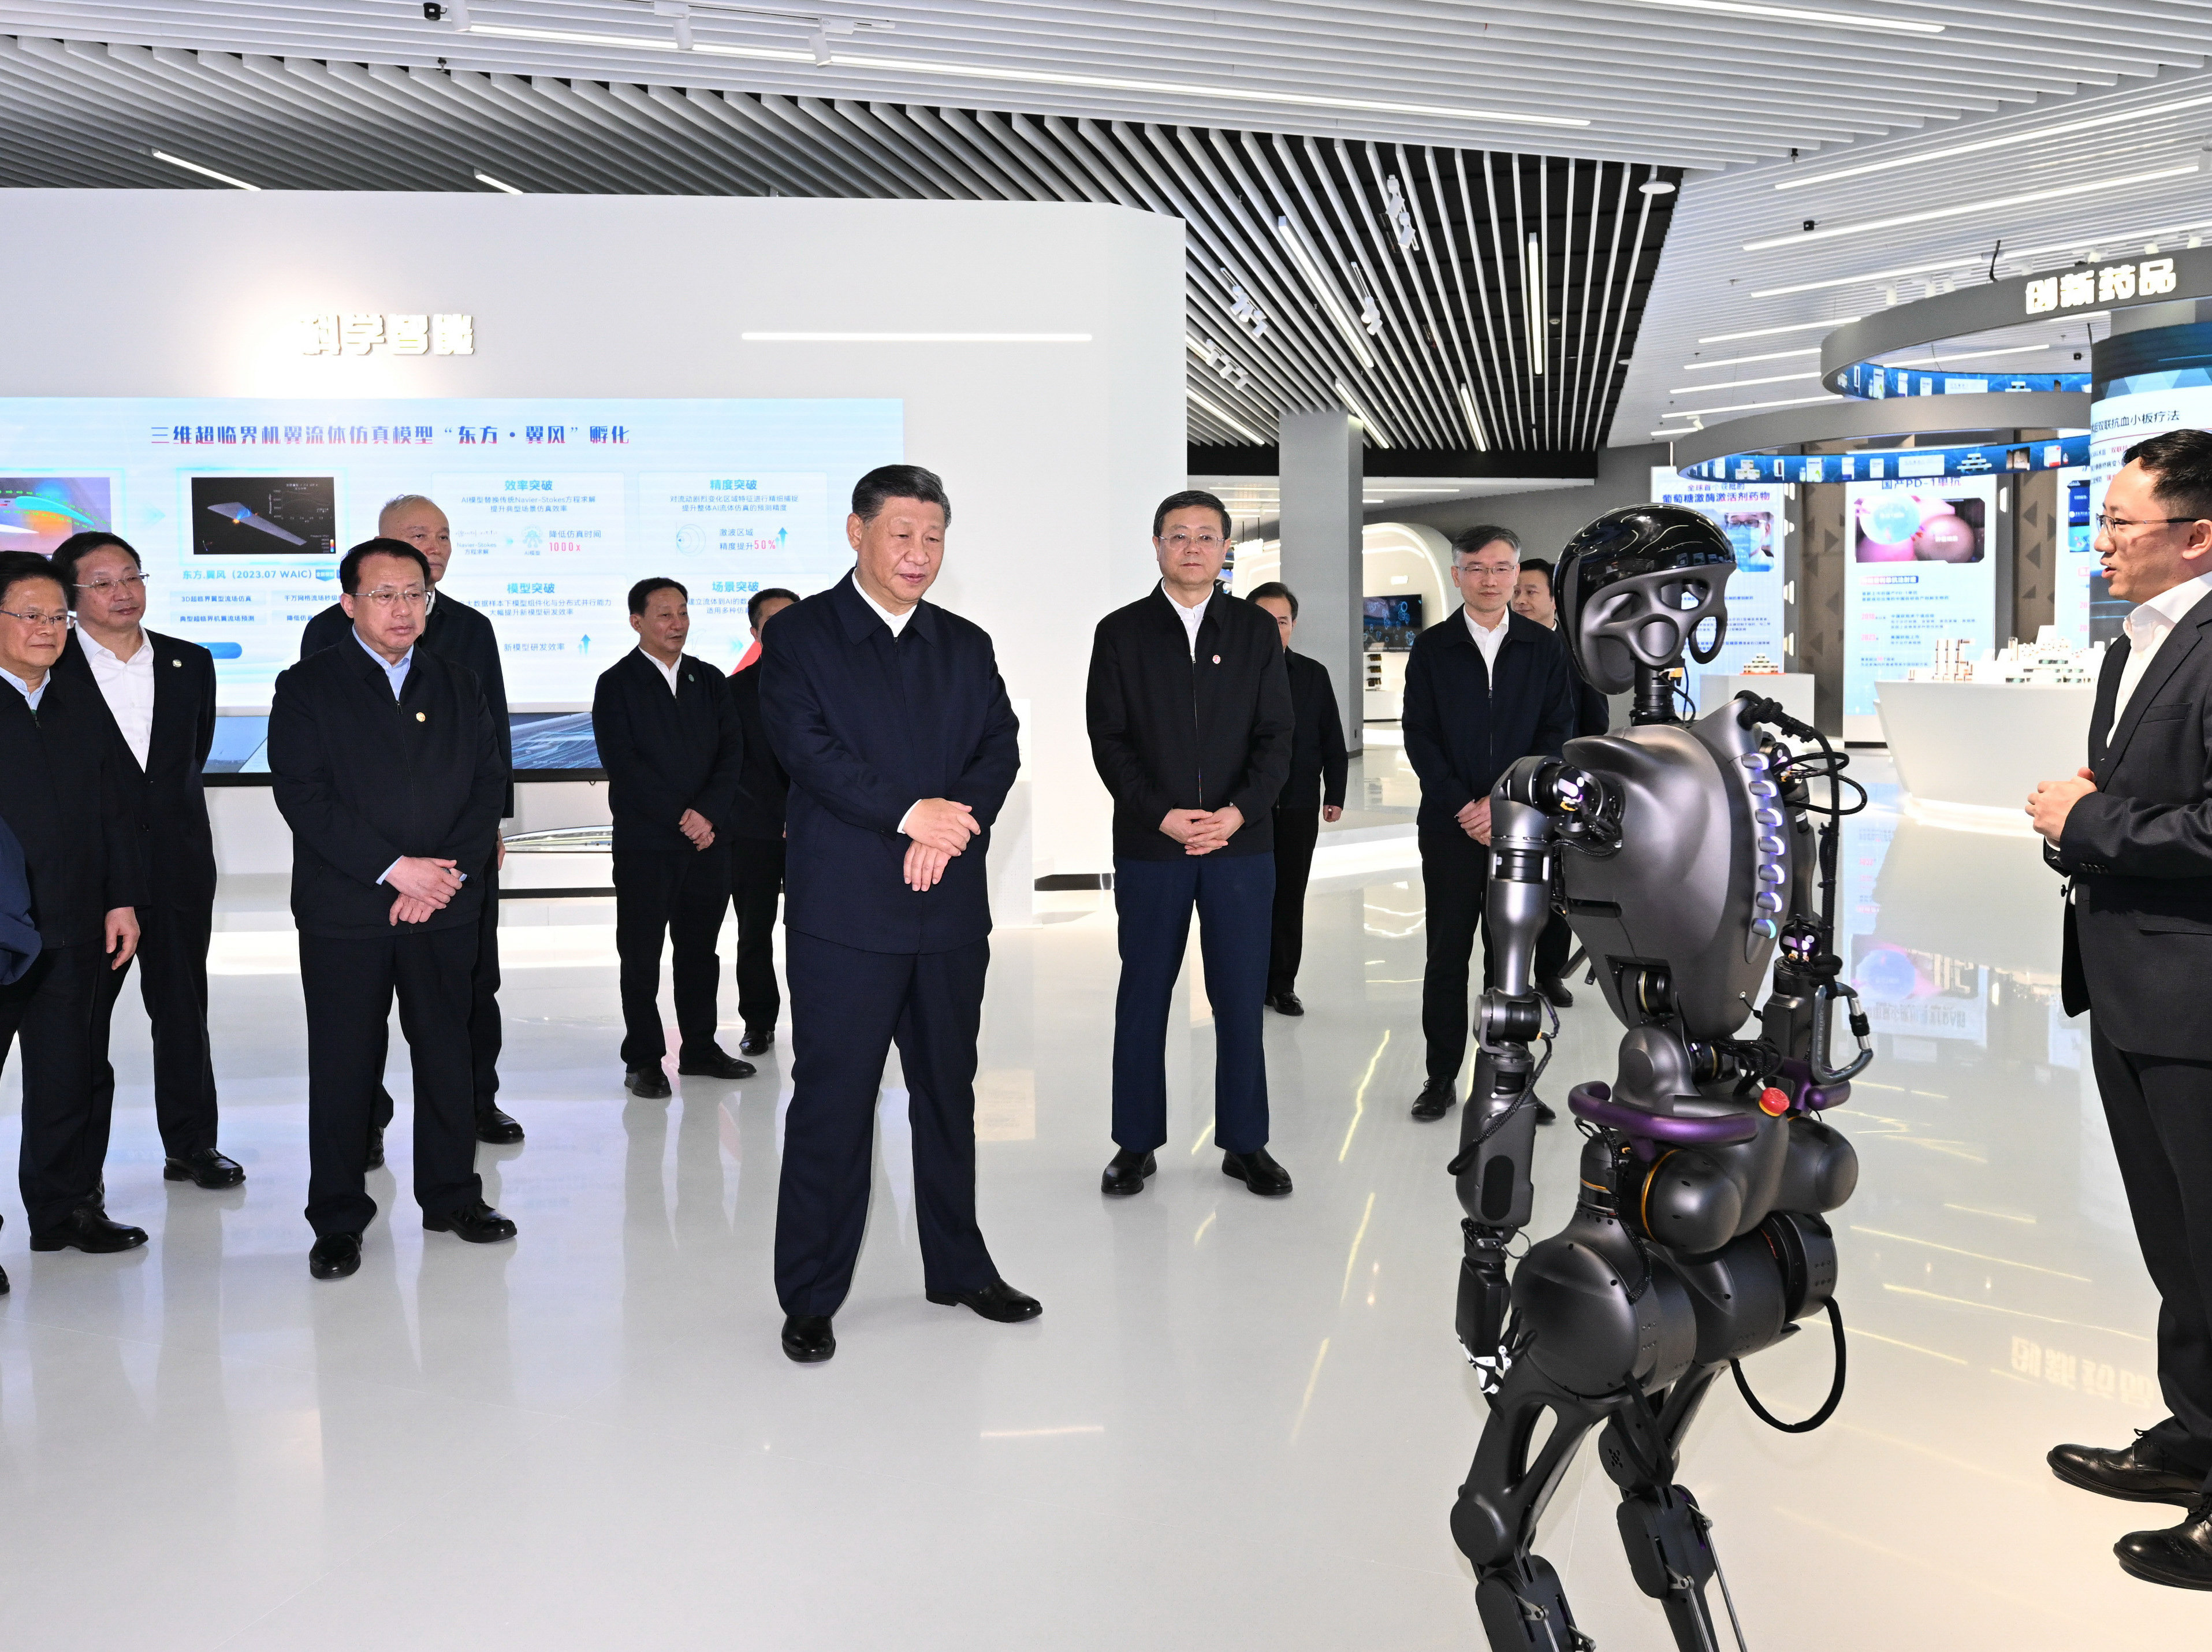 President Xi Jinping inspects an exhibition on Shanghai’s sci-tech innovations. Photo: Xinhua